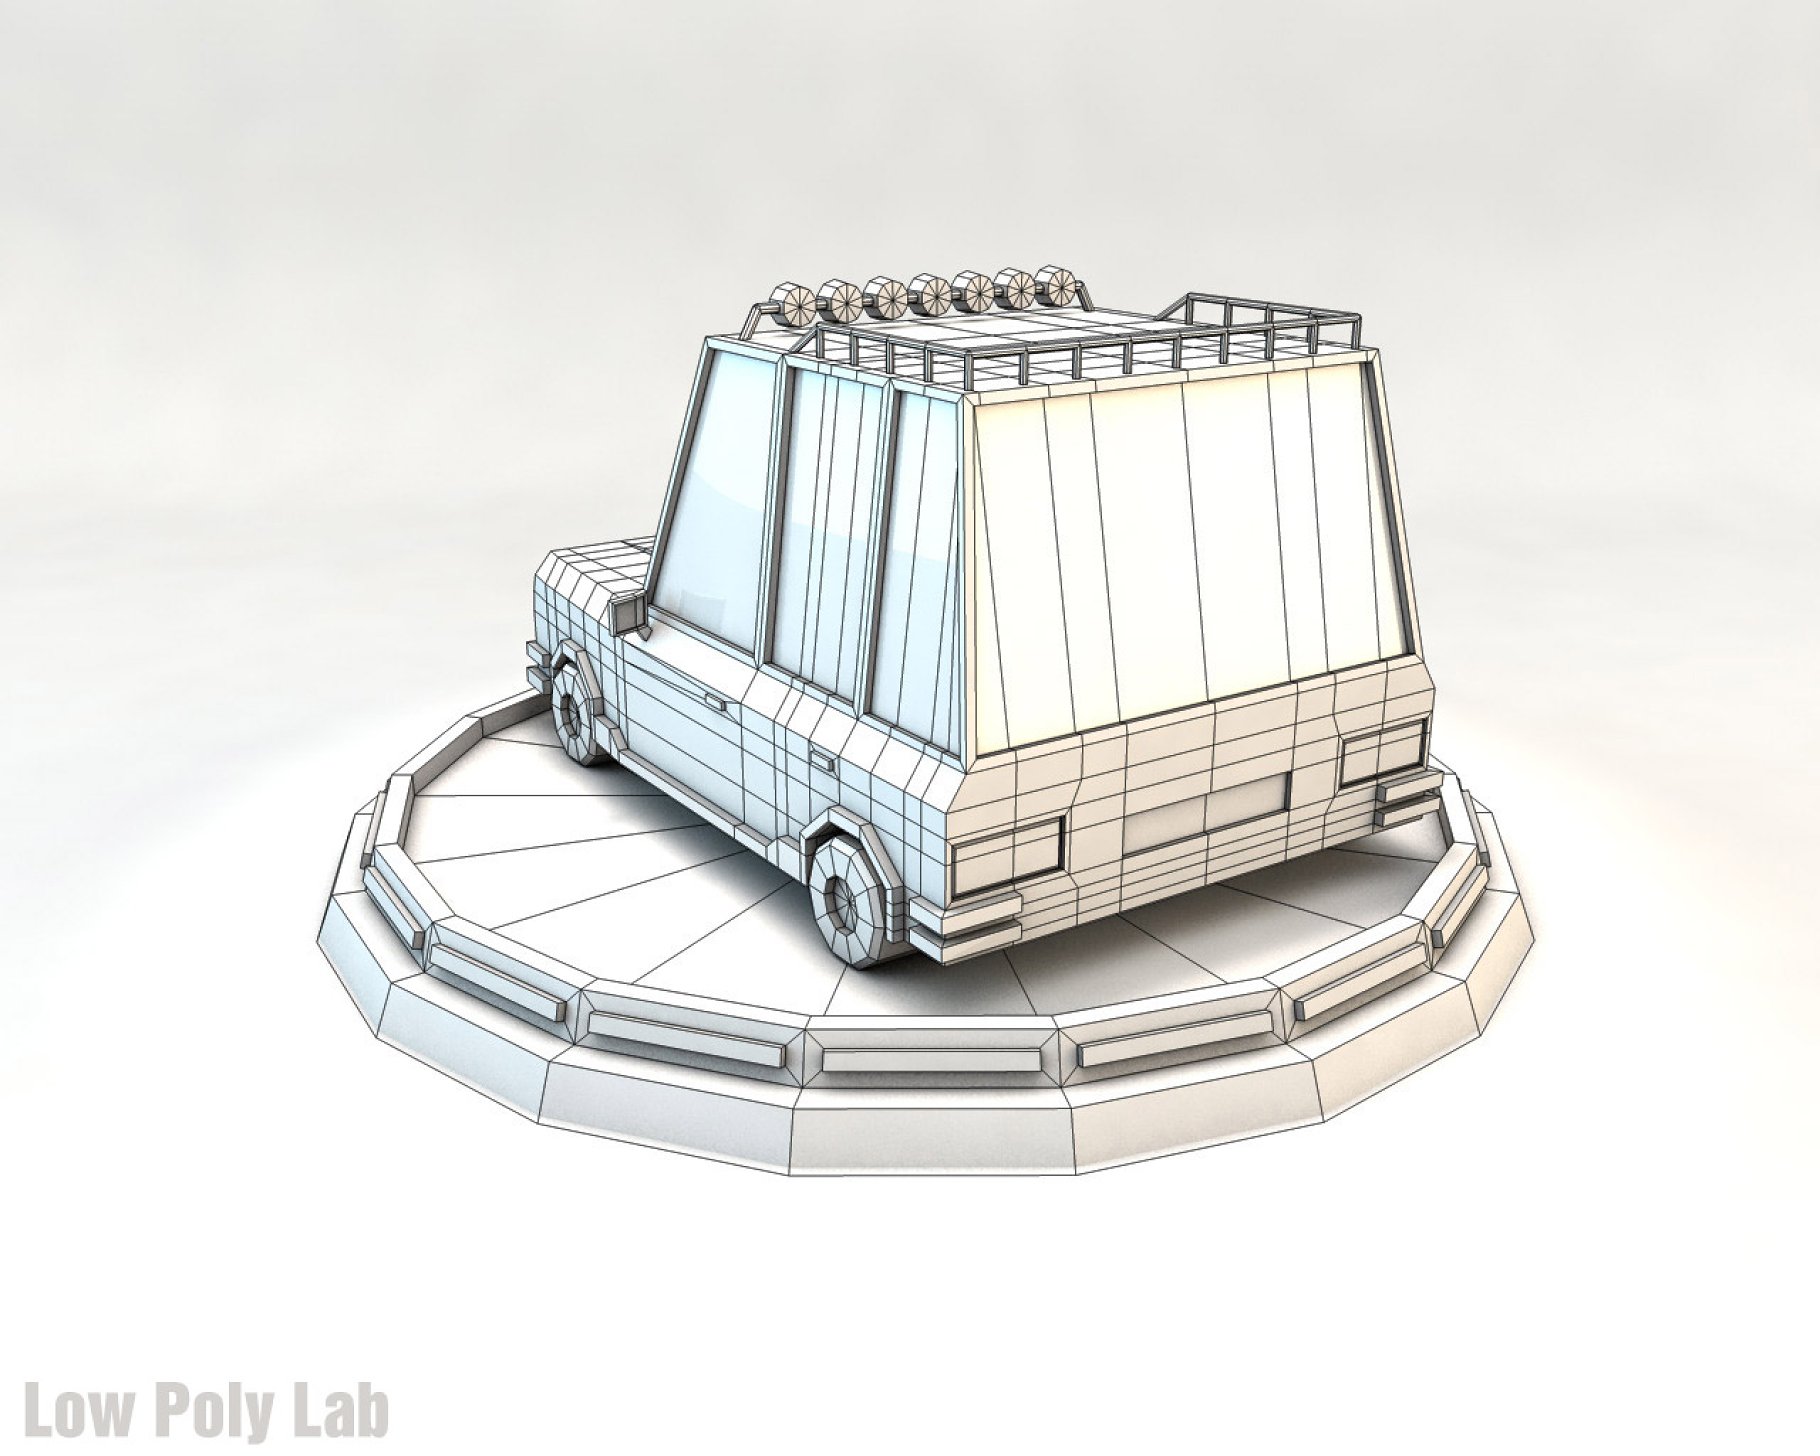 Gray low poly car jeep back graphic mockup on a gray background.